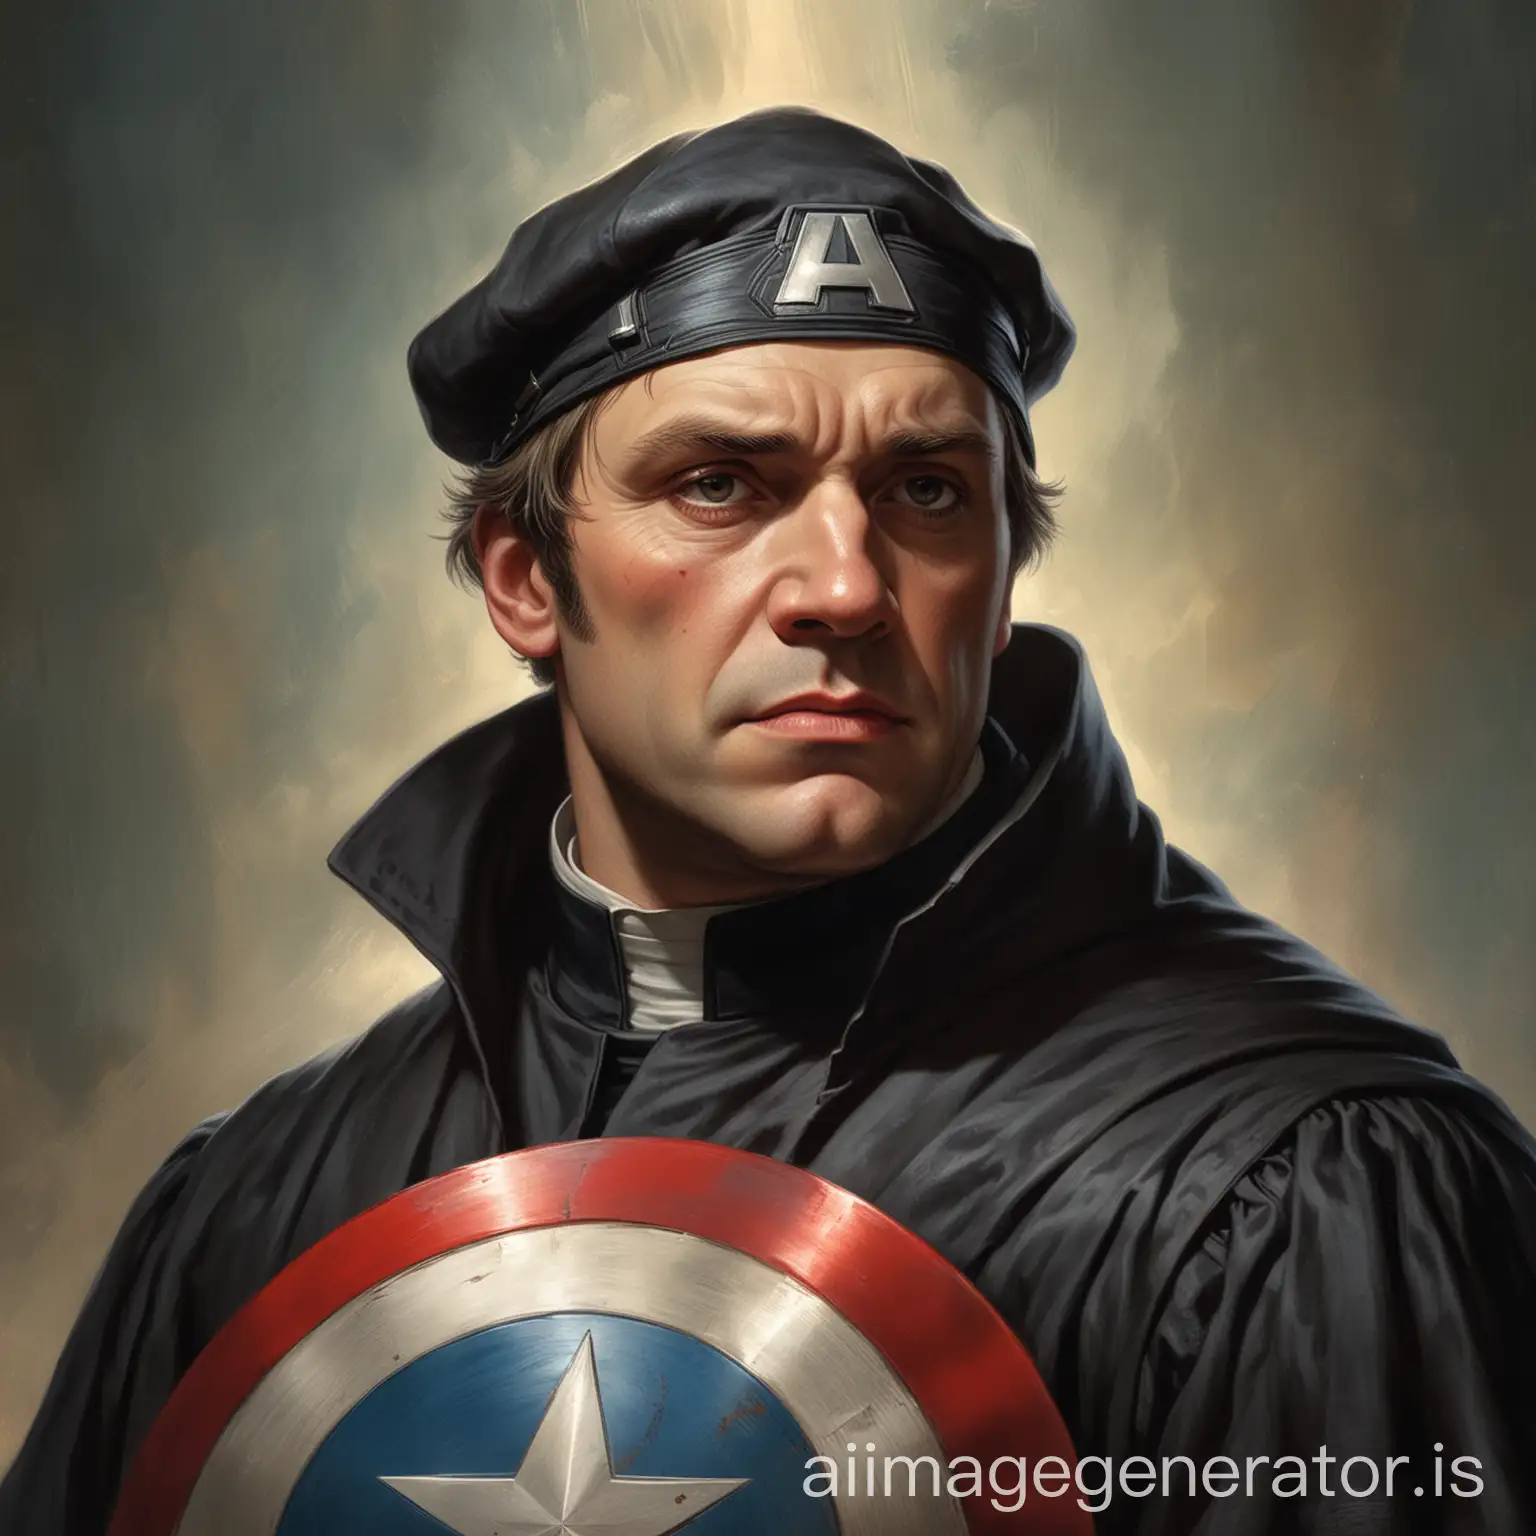 Martin Luther of the protestant reformation as captain America